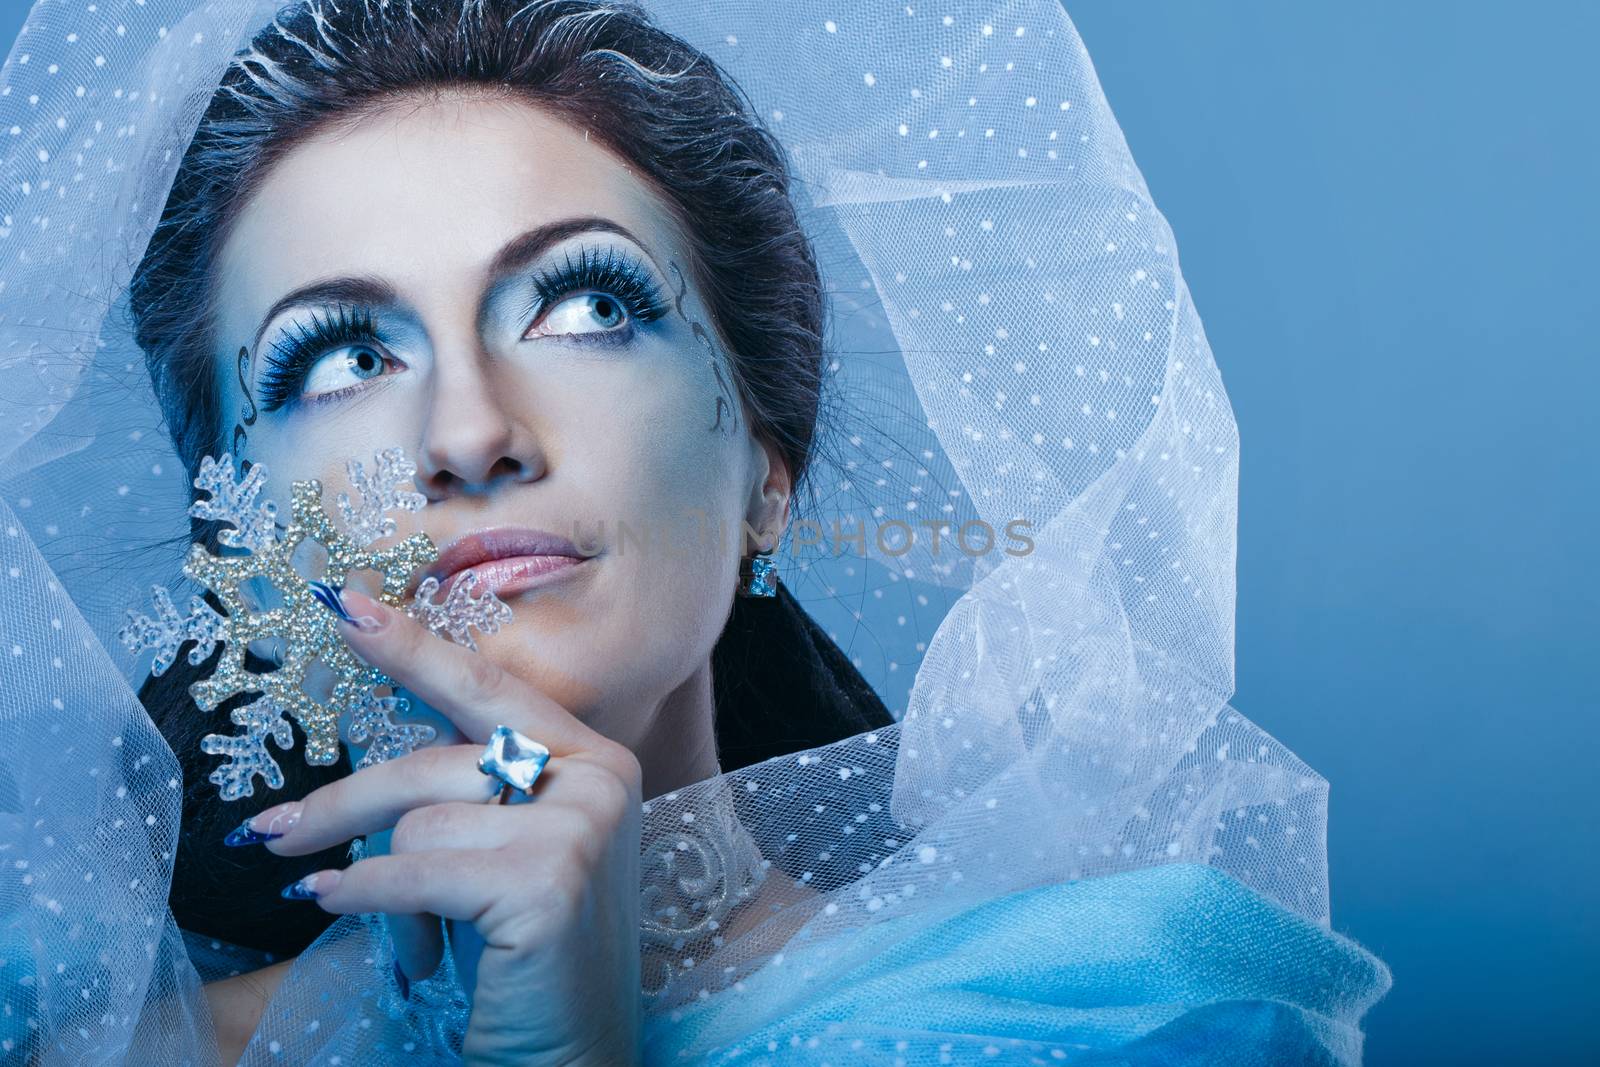 Girl with scenic make-up of the Snow Queen is holding a snowflake shot closeup